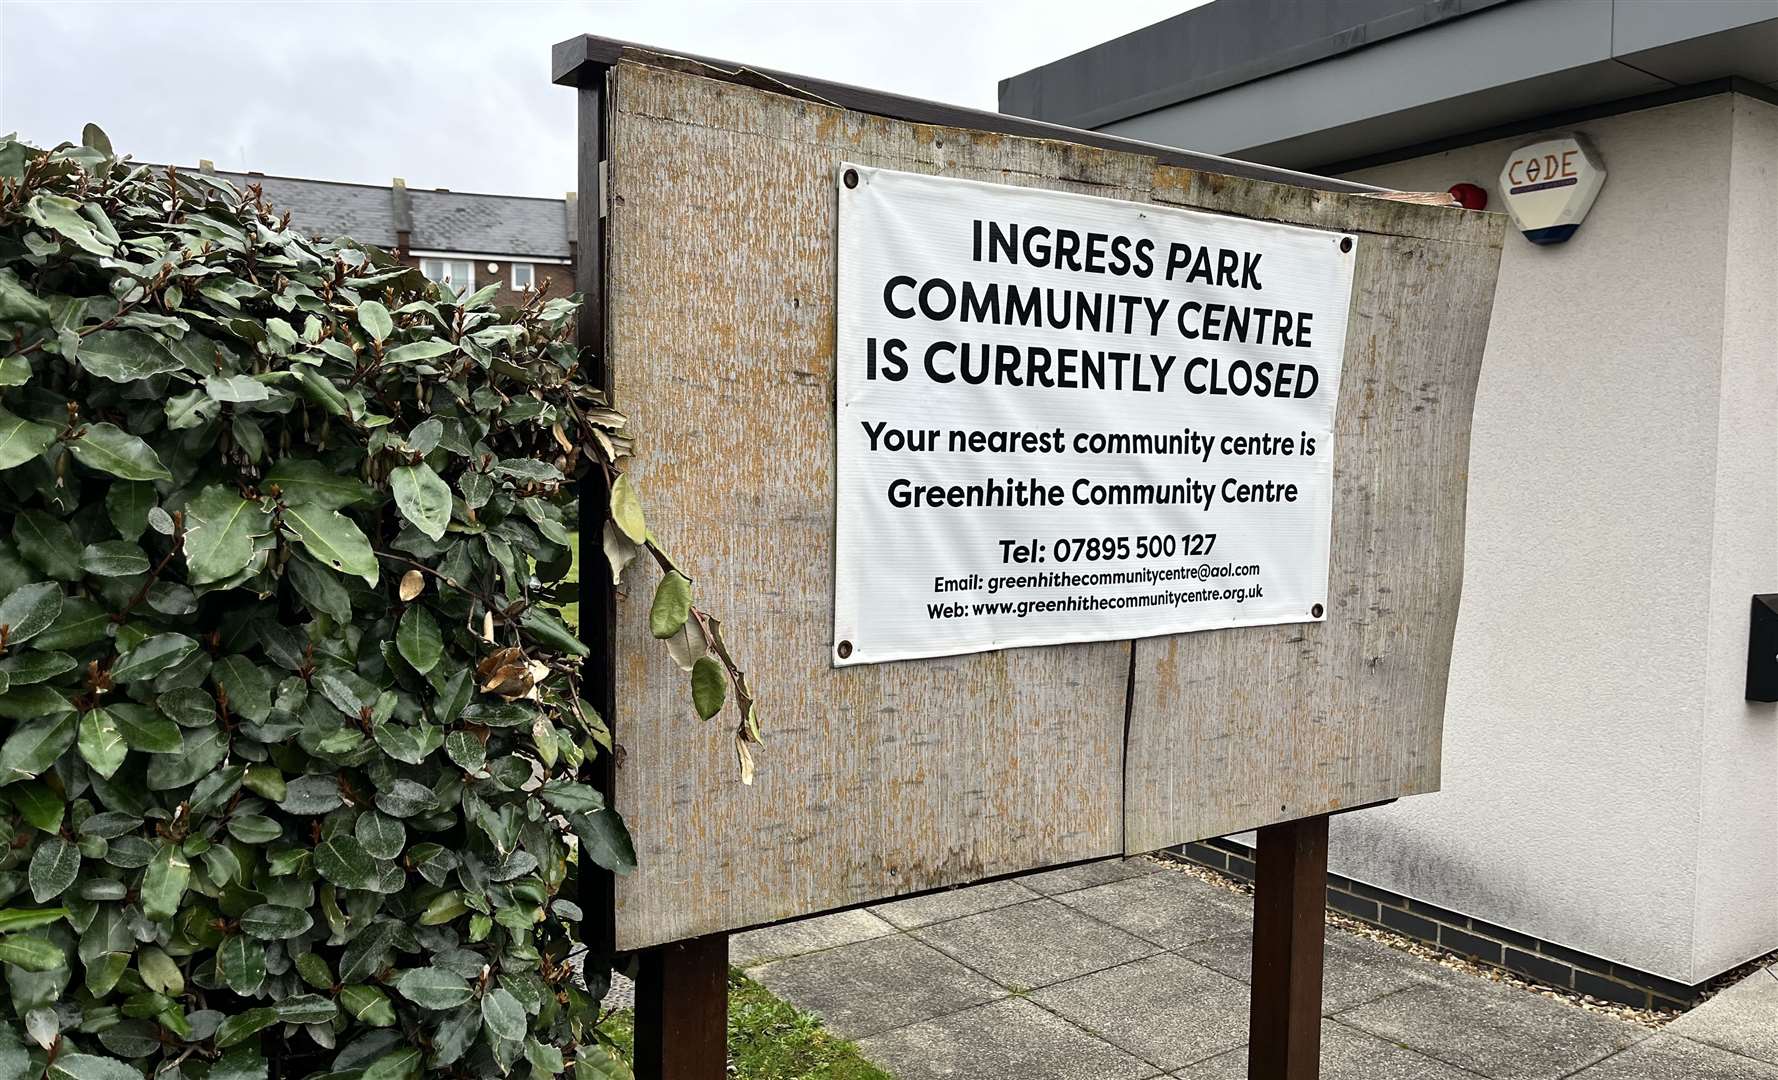 Ingress Park Community Centre has not opened since it was built 13 years ago